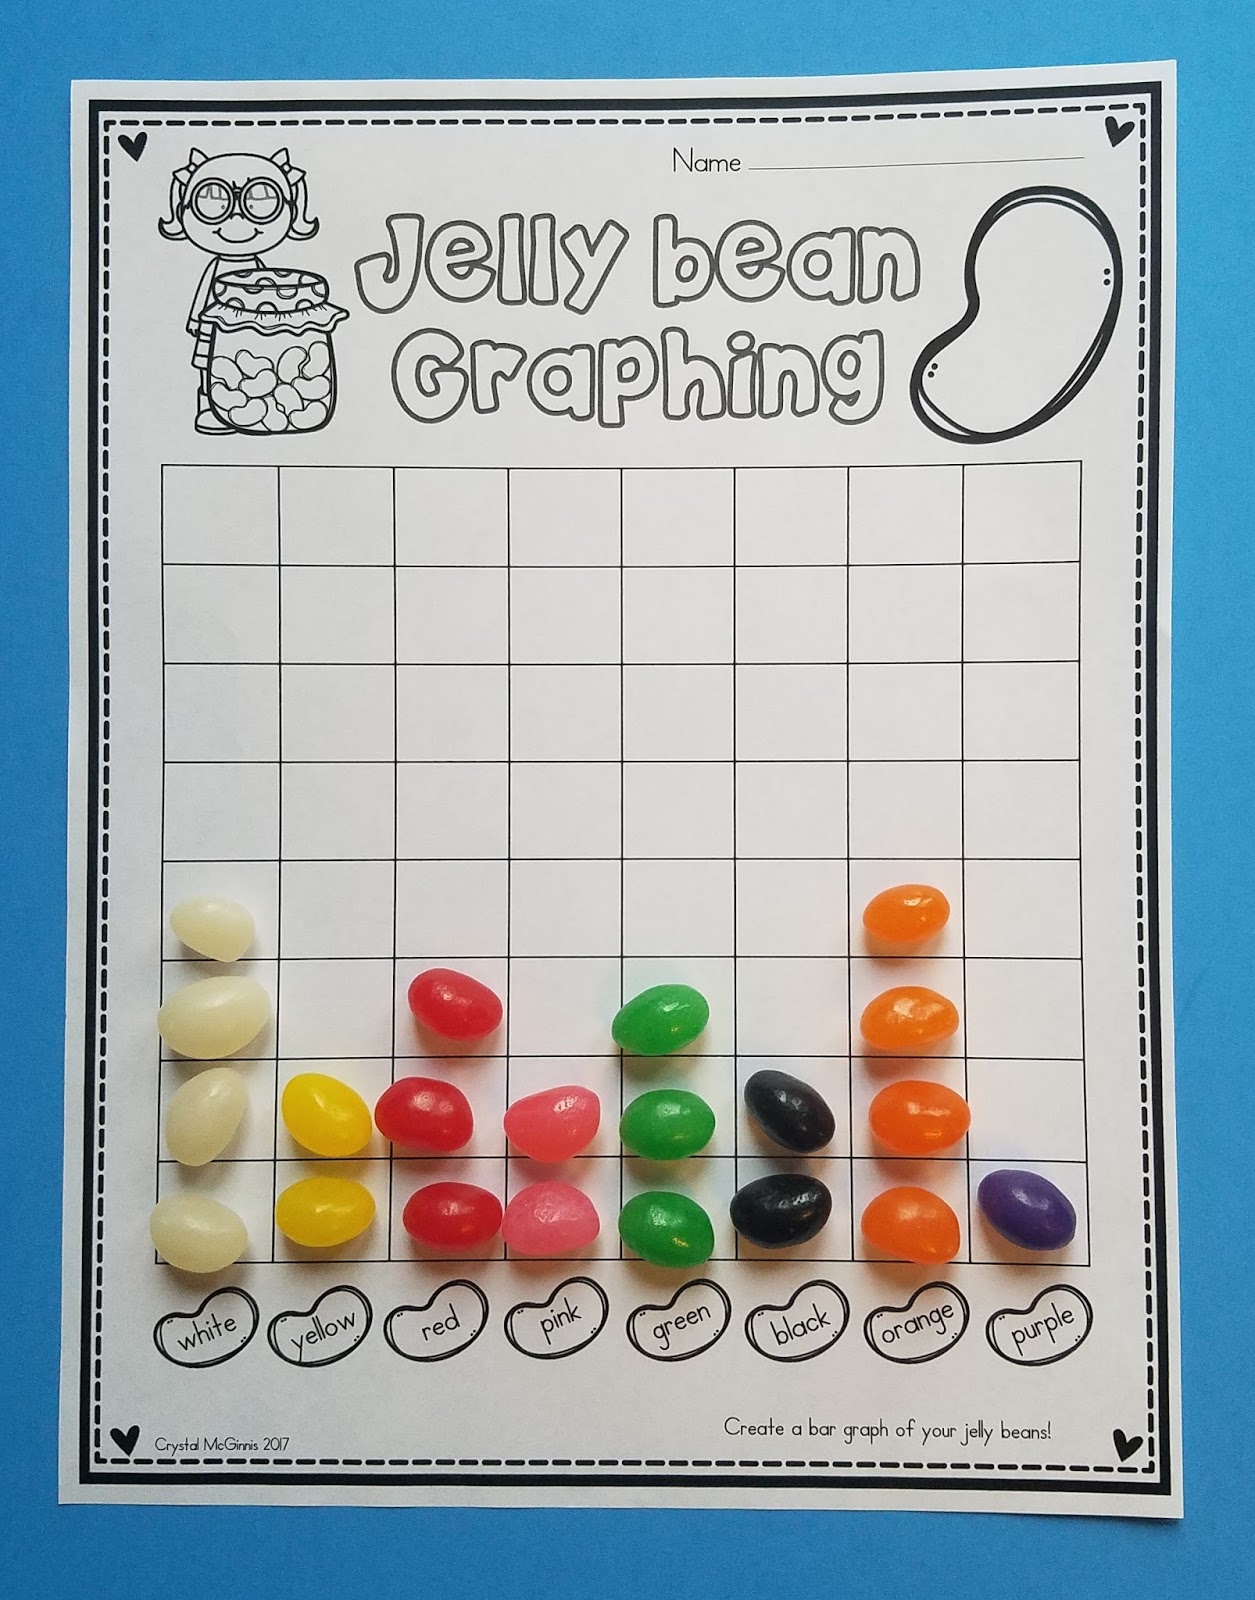 011+edited.jpg (1255×1600) (With images) | Jelly bean math activities